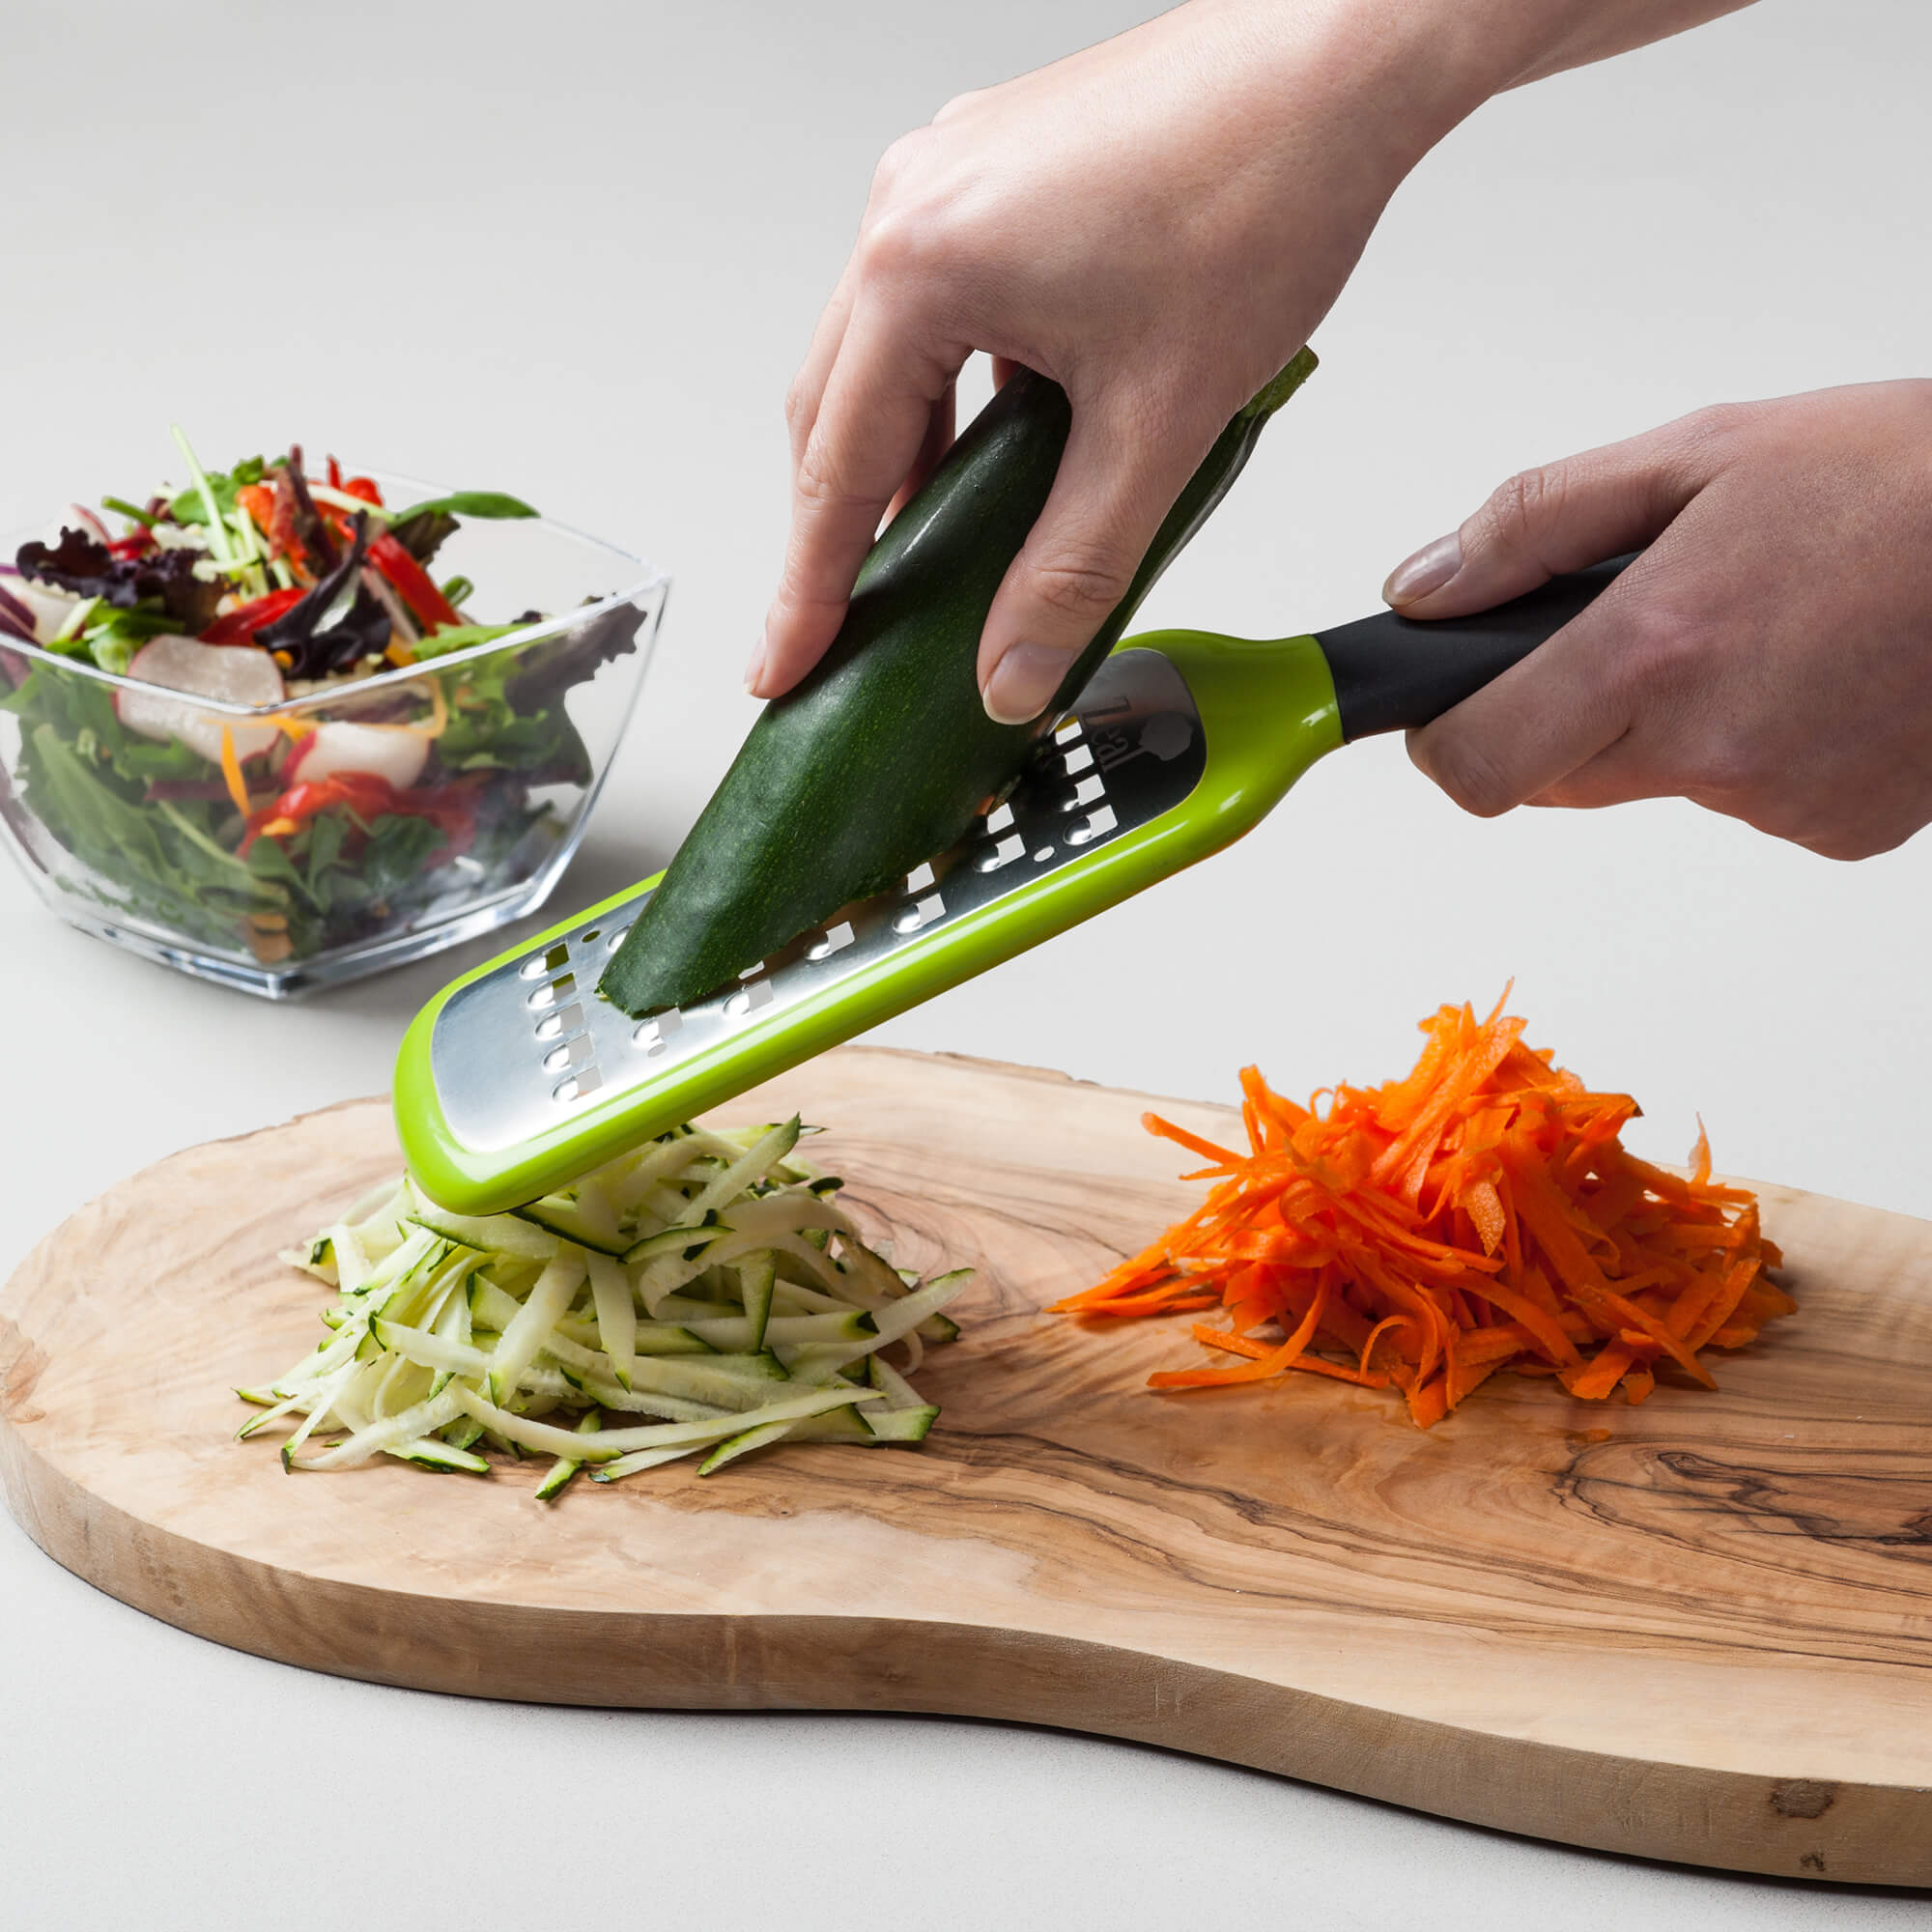 Grated courgette and carrot using a Zeal Coarse Grater